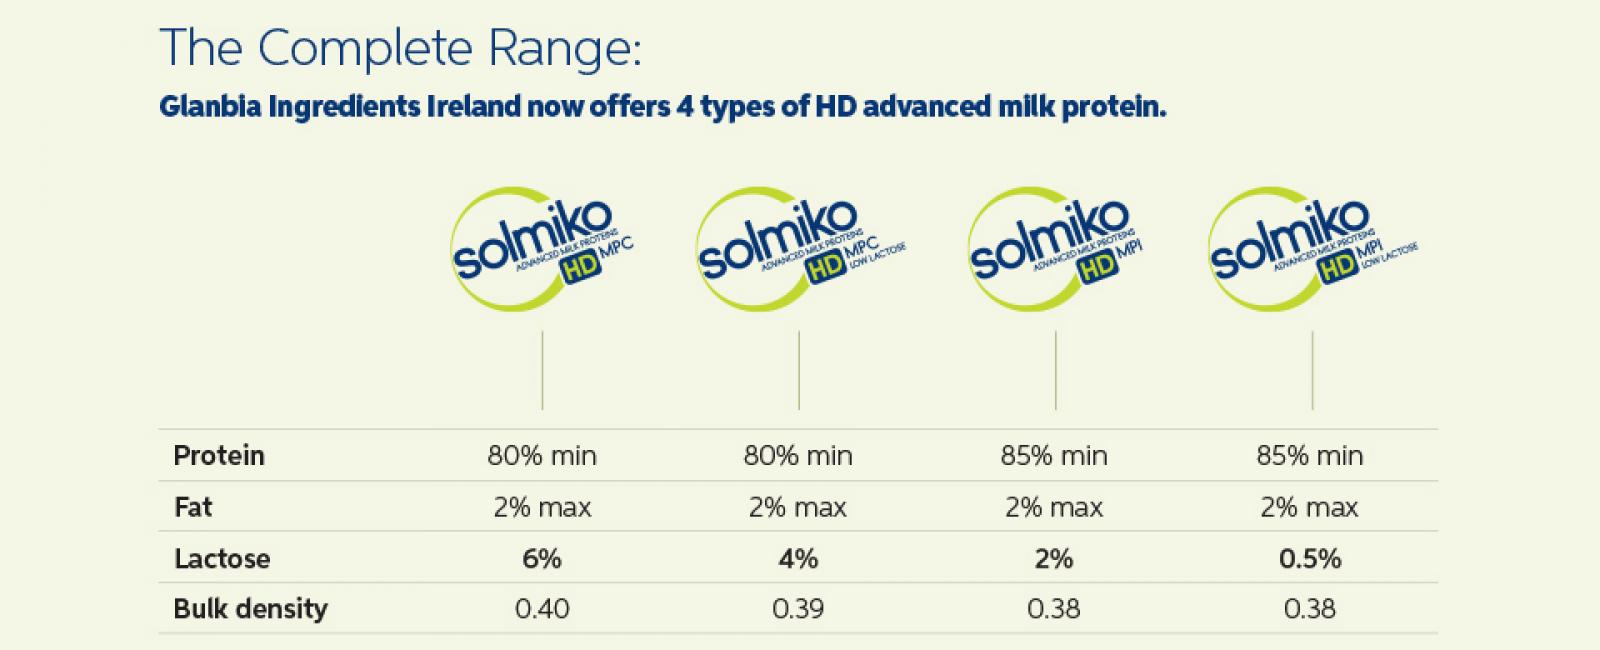 table showing the complete range of Solmiko HD products